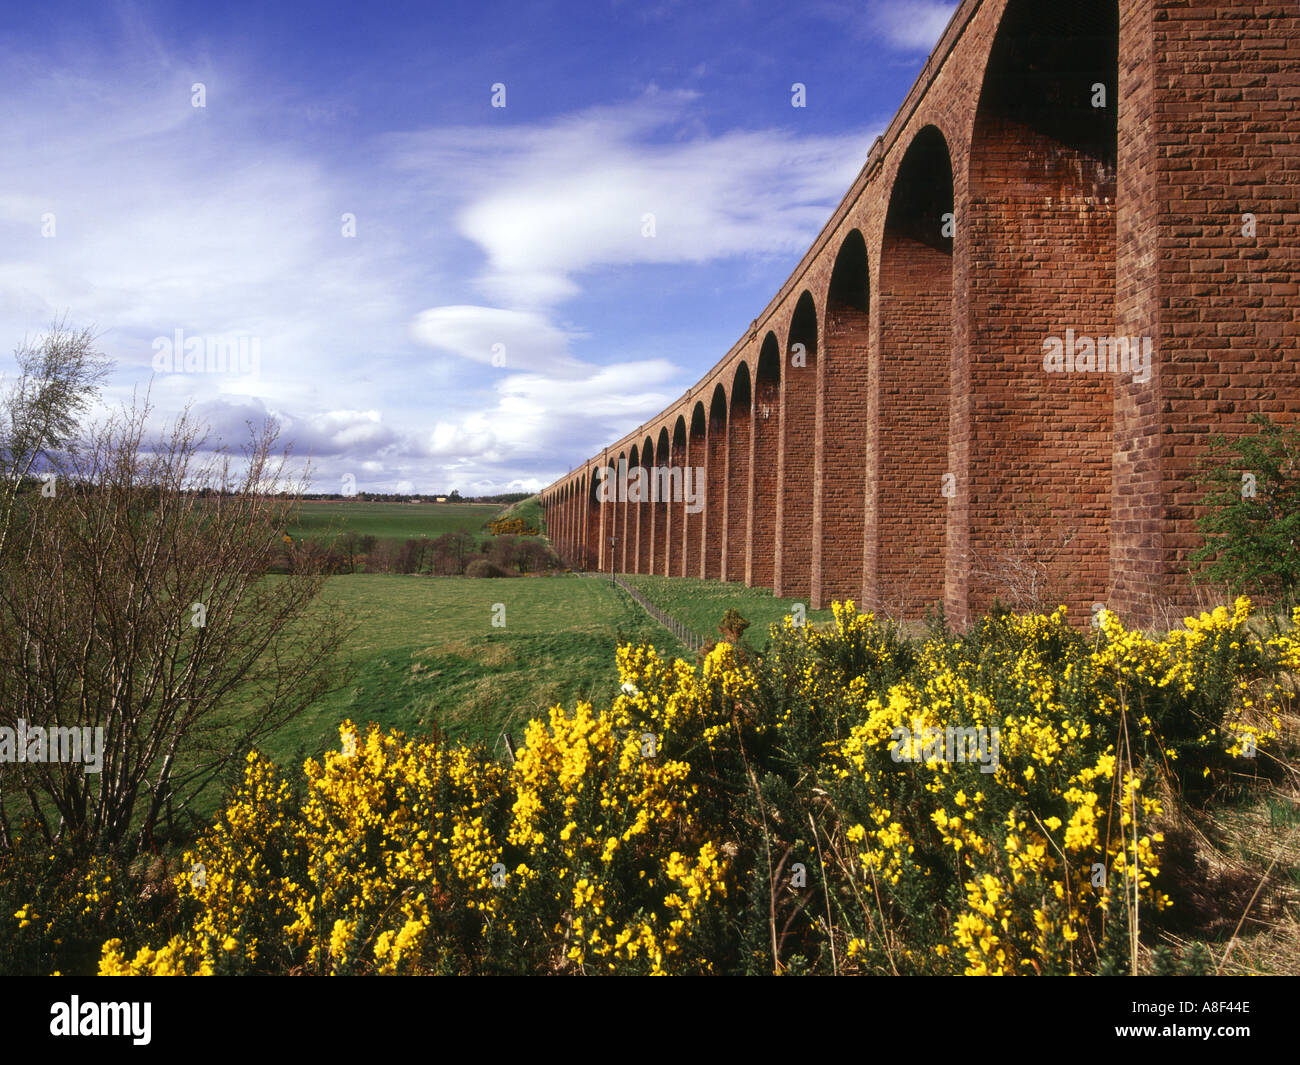 dh Culloden Railway Viaduct NAIRN VALLEY INVERNESS SHIRE Bridge Viaducts scotland uk Stock Photo